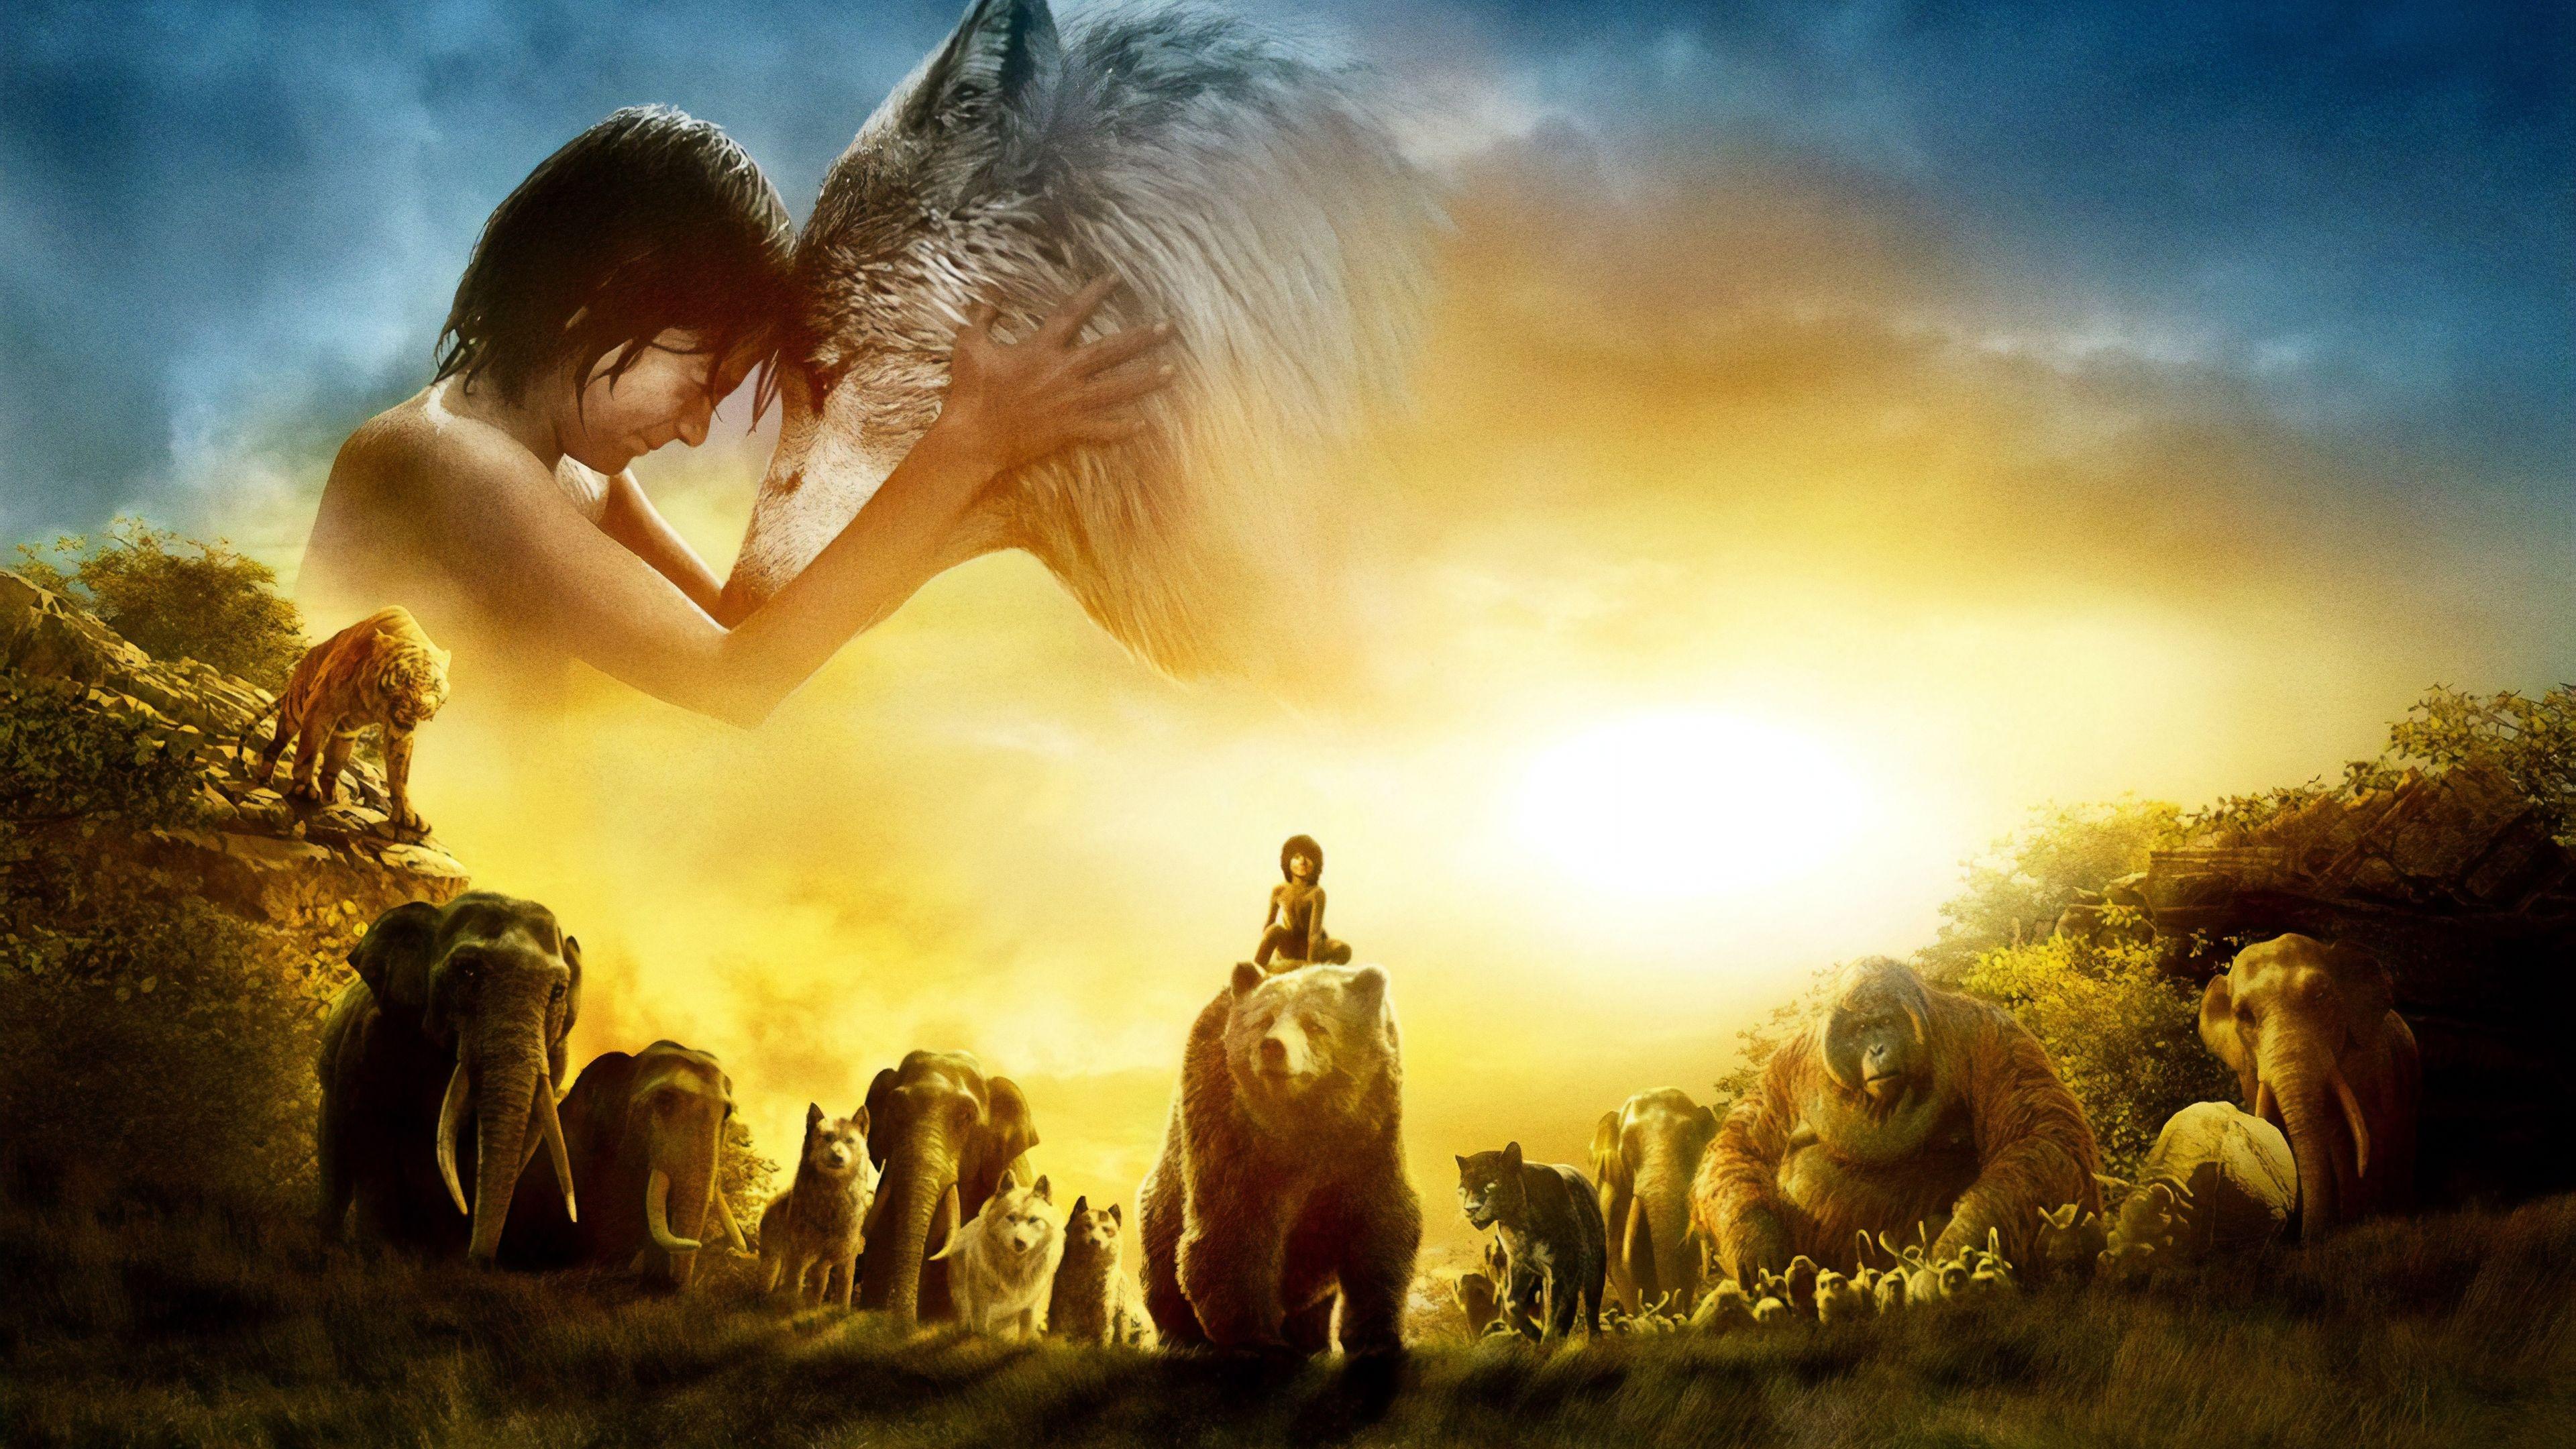 Jungle Book Wallpapers - Top Free Jungle Book Backgrounds ...